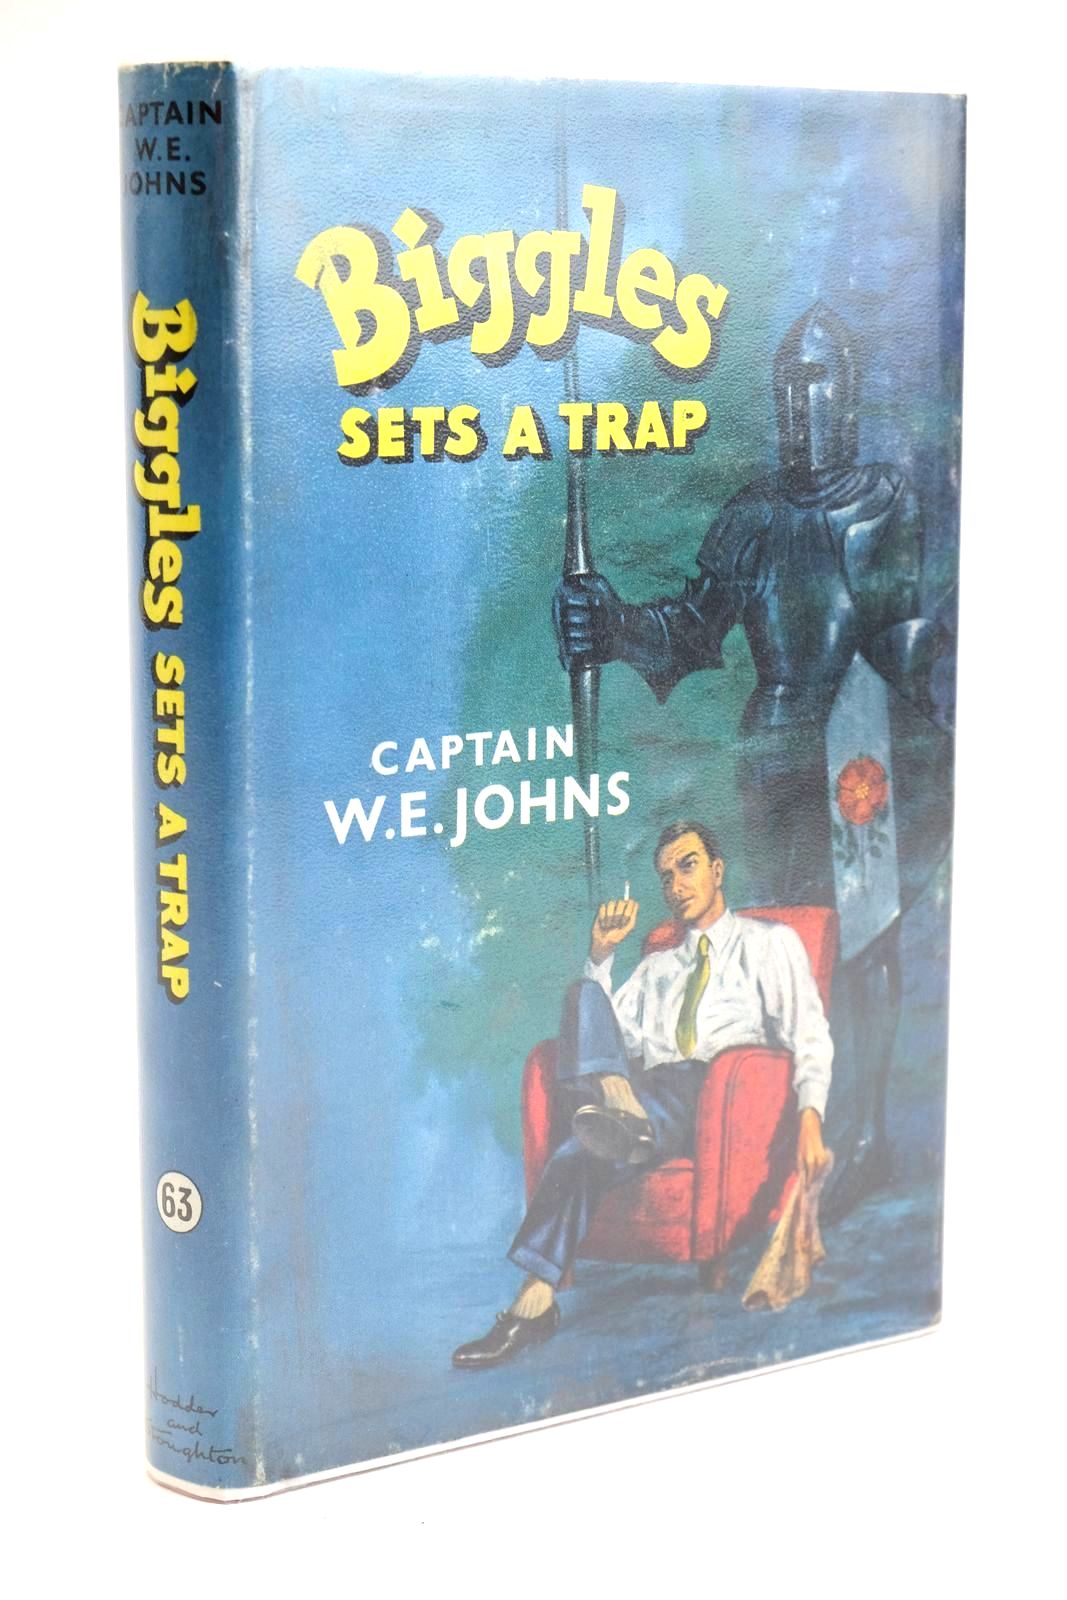 Photo of BIGGLES SETS A TRAP written by Johns, W.E. illustrated by Stead,  published by Hodder & Stoughton (STOCK CODE: 1323432)  for sale by Stella & Rose's Books